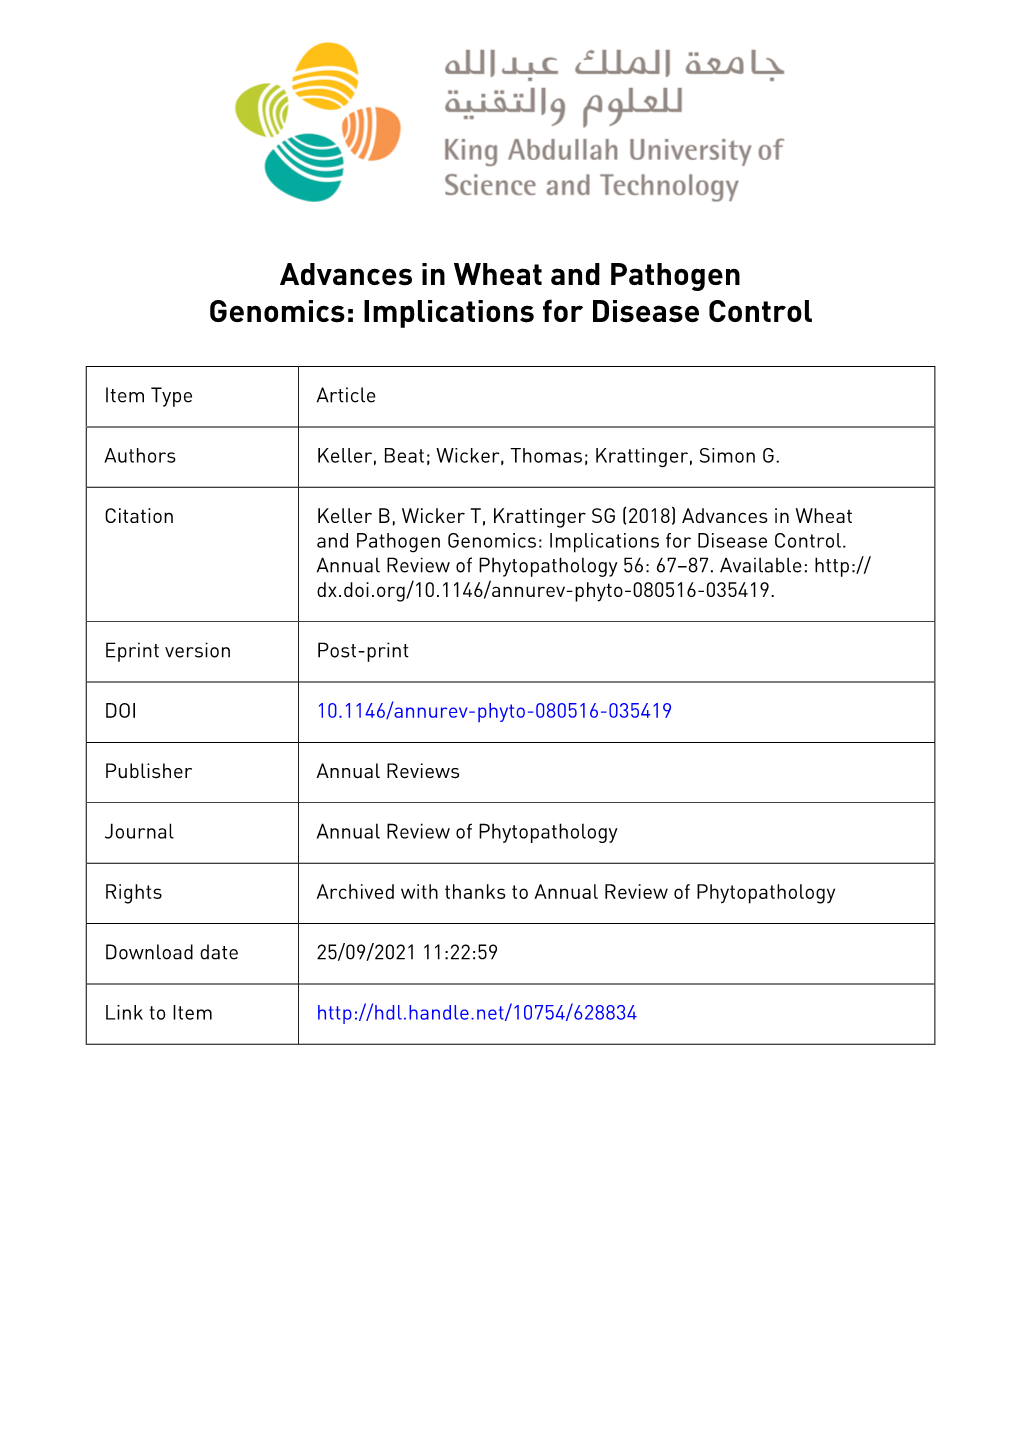 Advances in Wheat and Pathogen Genomics: Implications for Disease Control